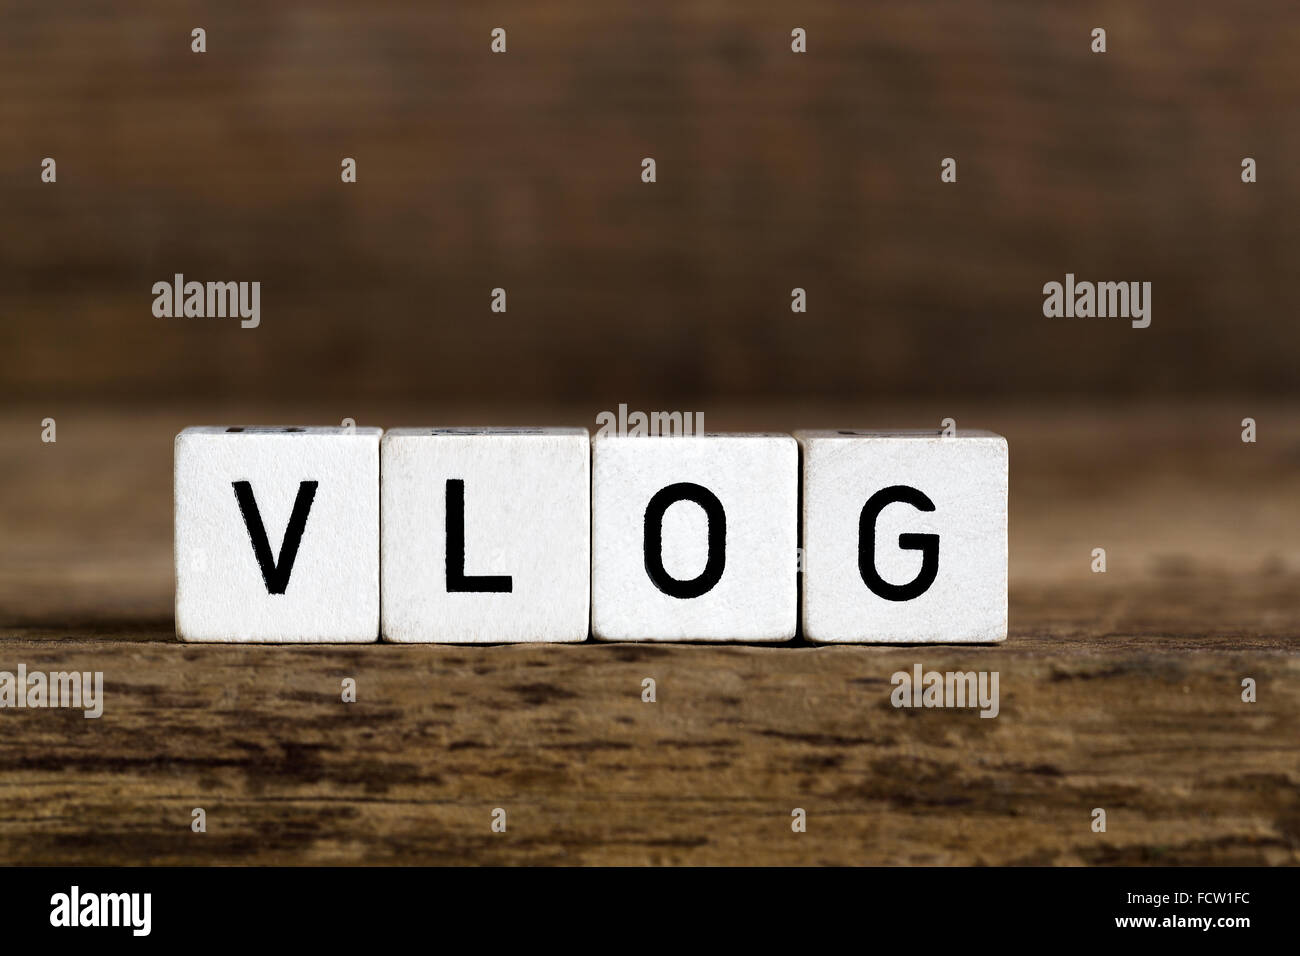 The word vlog written in cubes on wooden background Stock Photo